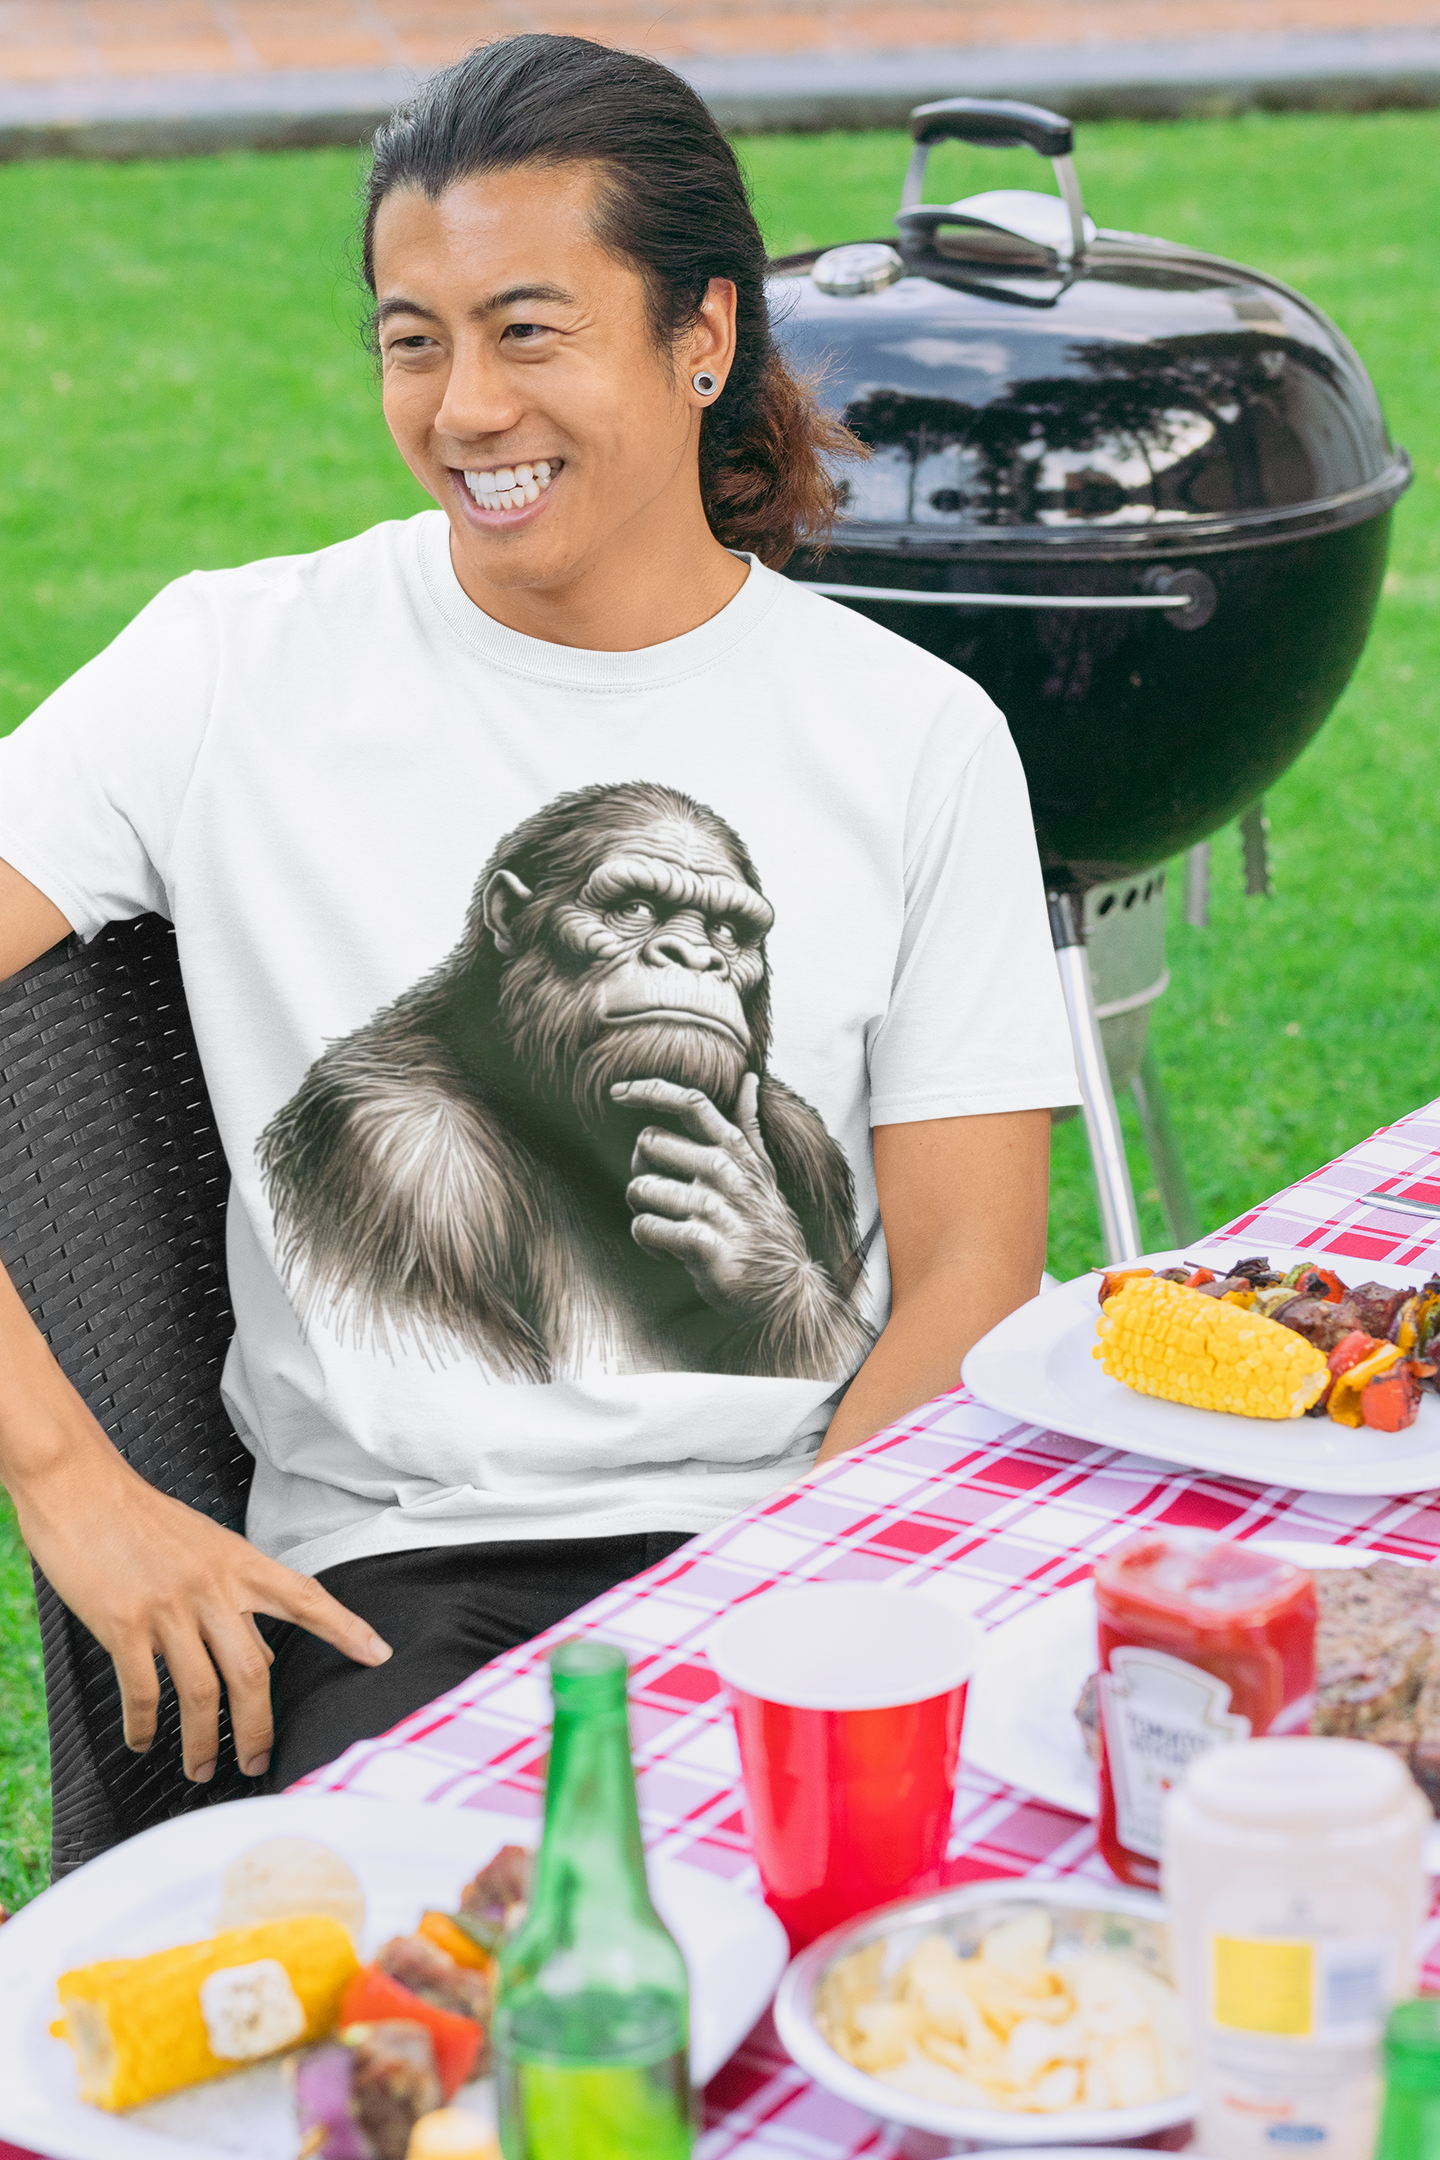 Thoughtful Squatch Cotton Tee